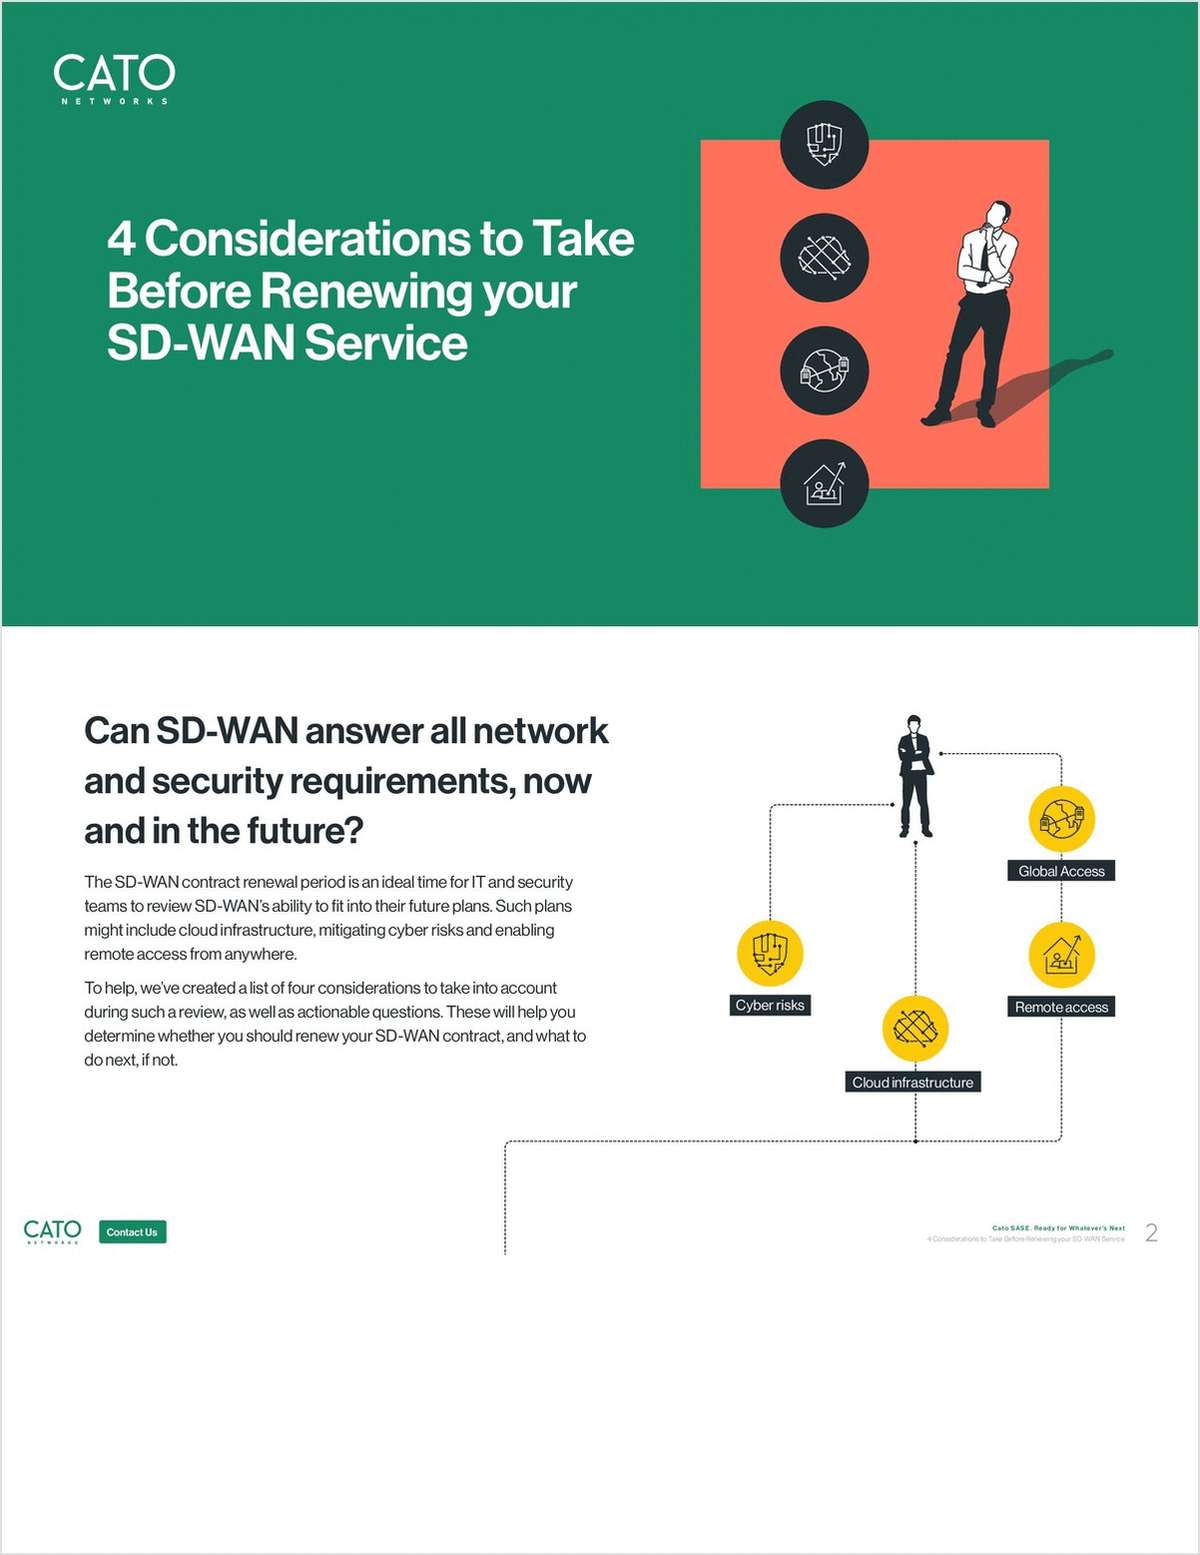 4 Considerations to Take Before Renewing Your SD-WAN Product or Contract